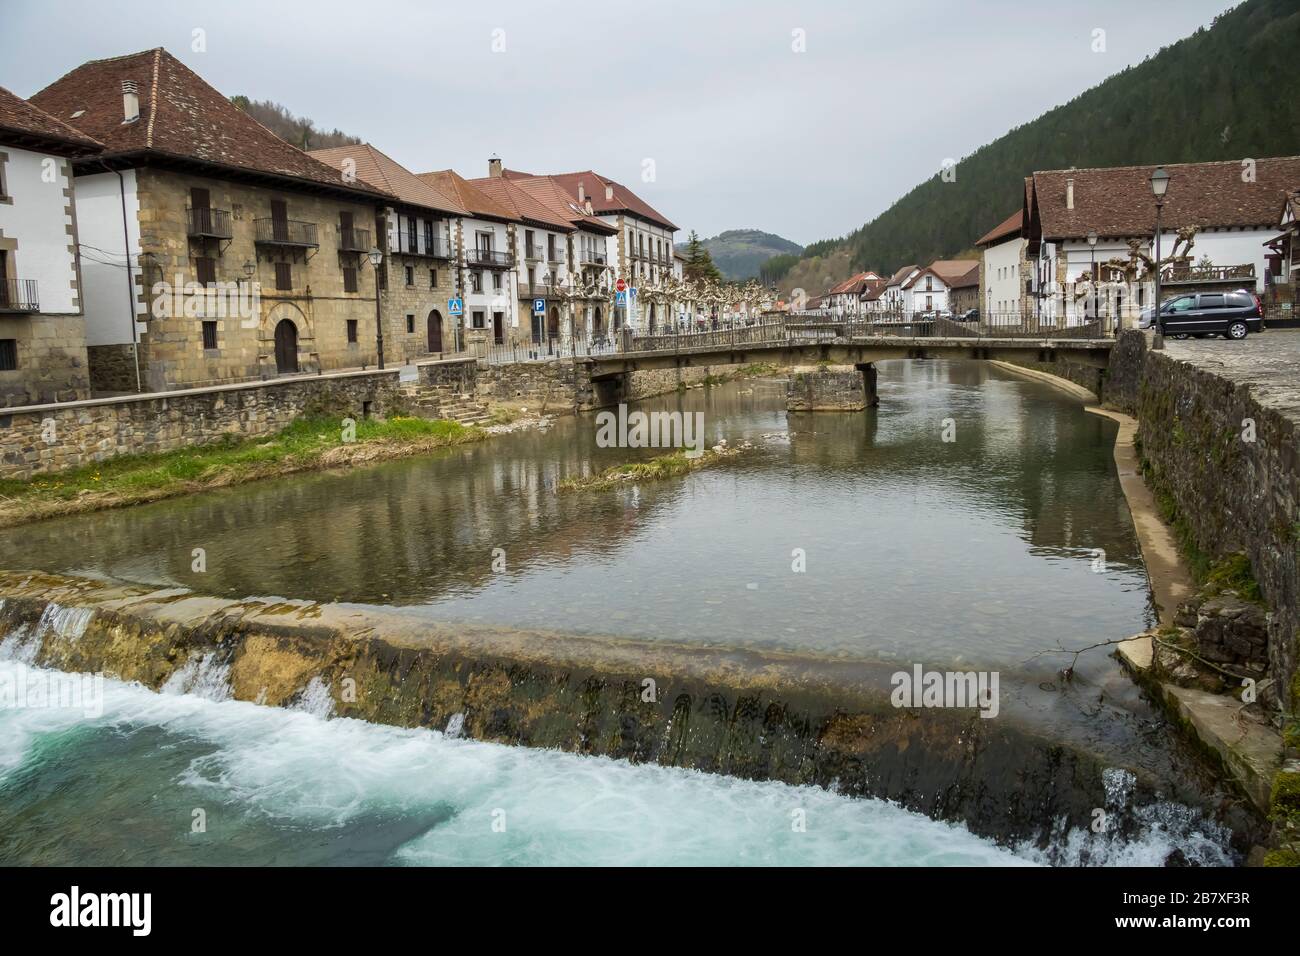 Ochagavía is a town and municipality located in the province and autonomous community of Navarre, northern Spain. Stock Photo